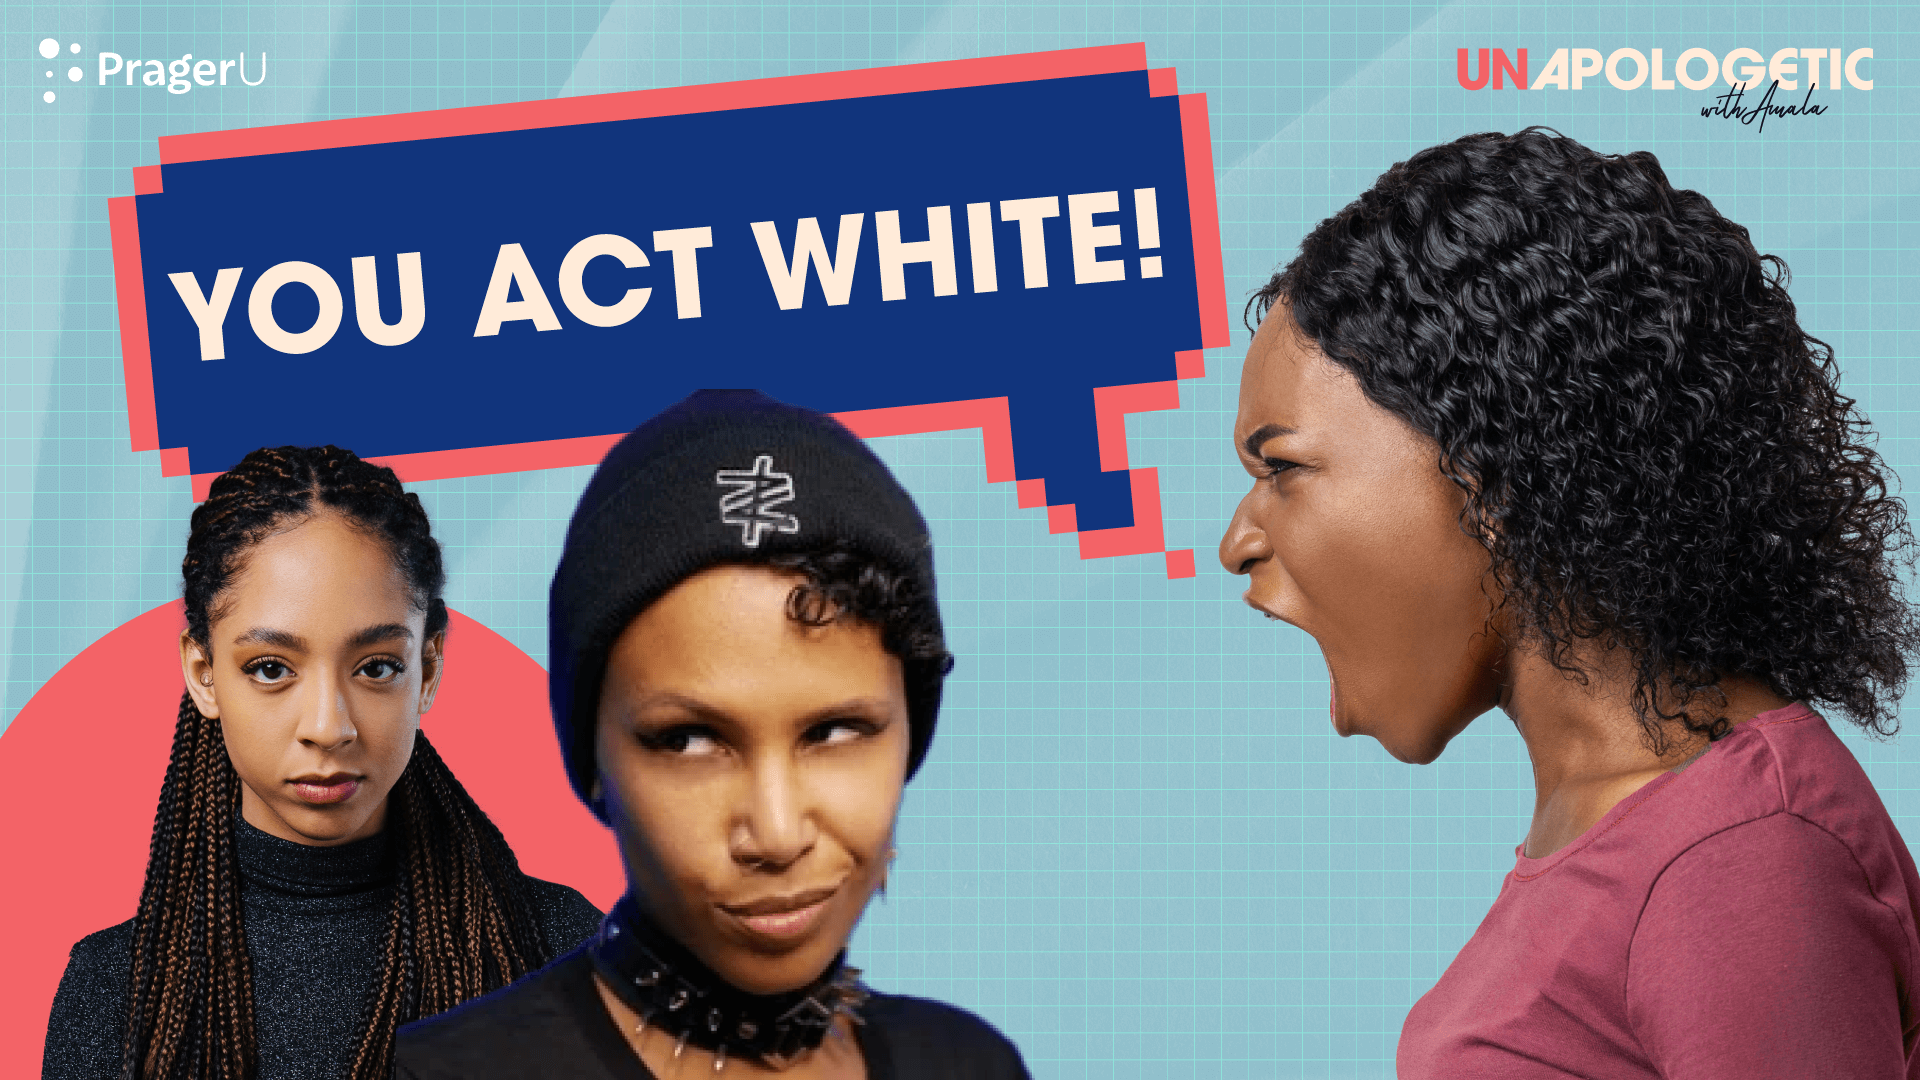 A Response to “You Act White” with Gothix